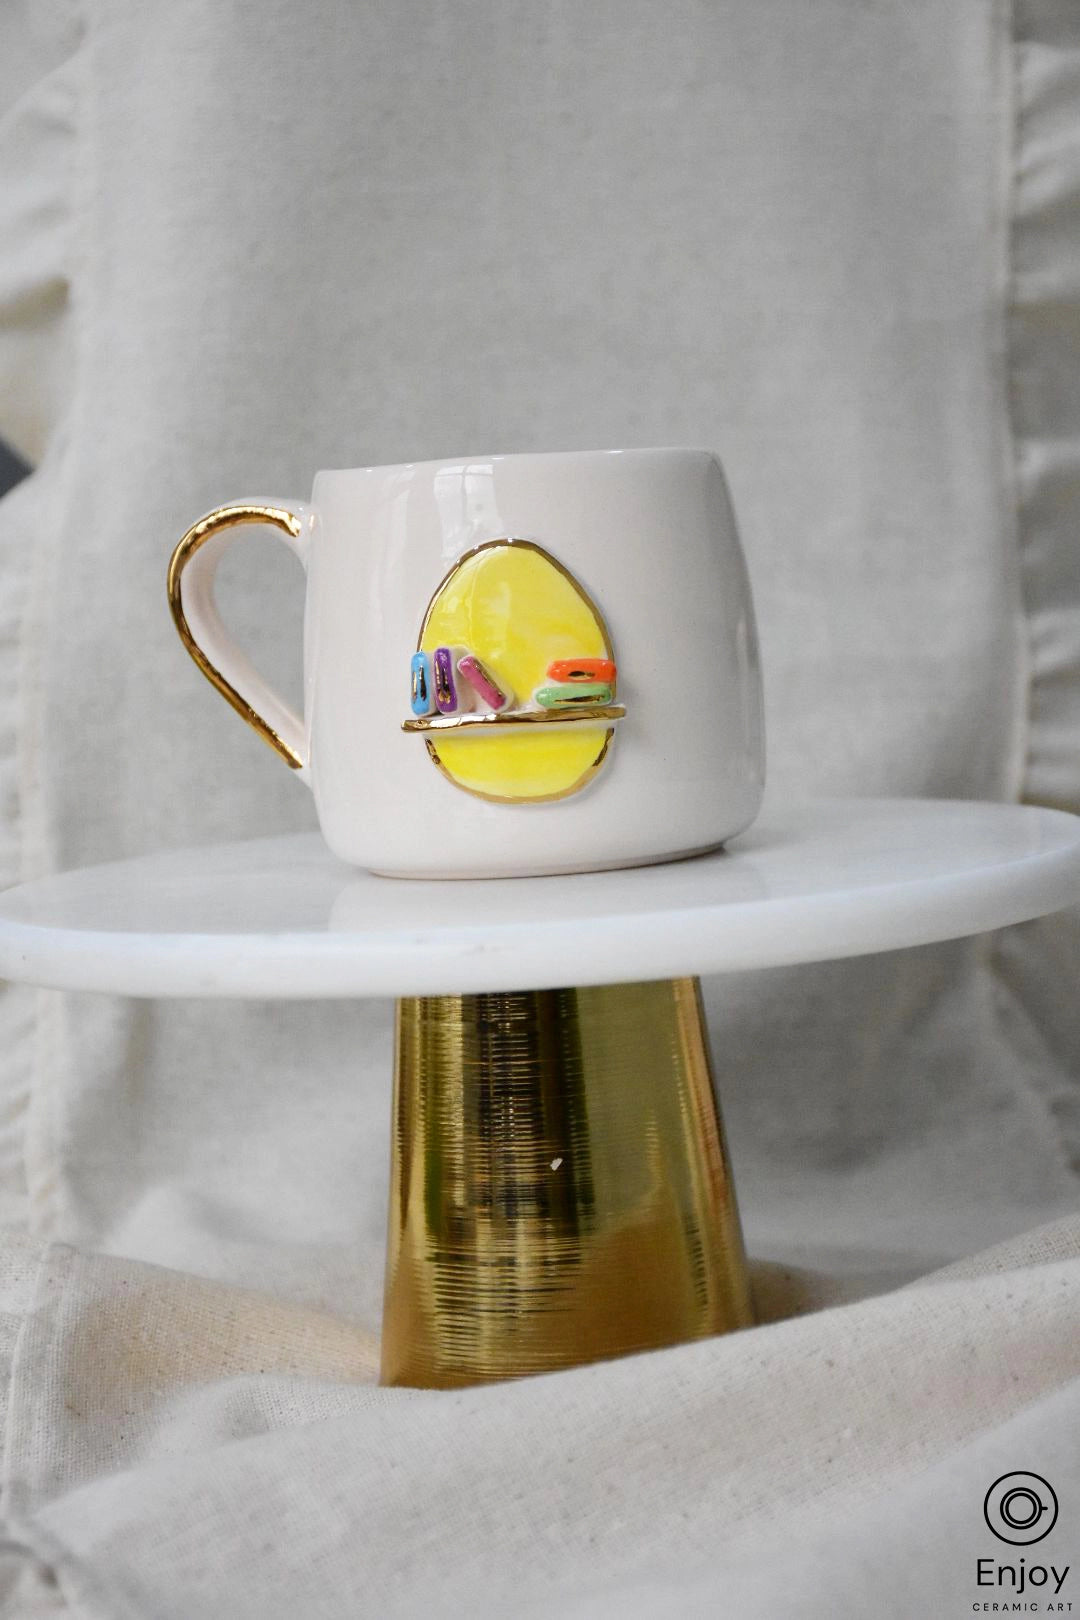 A chic white mug adorned with a colorful 3D bookshelf design, resting on a golden pedestal against a linen canvas.